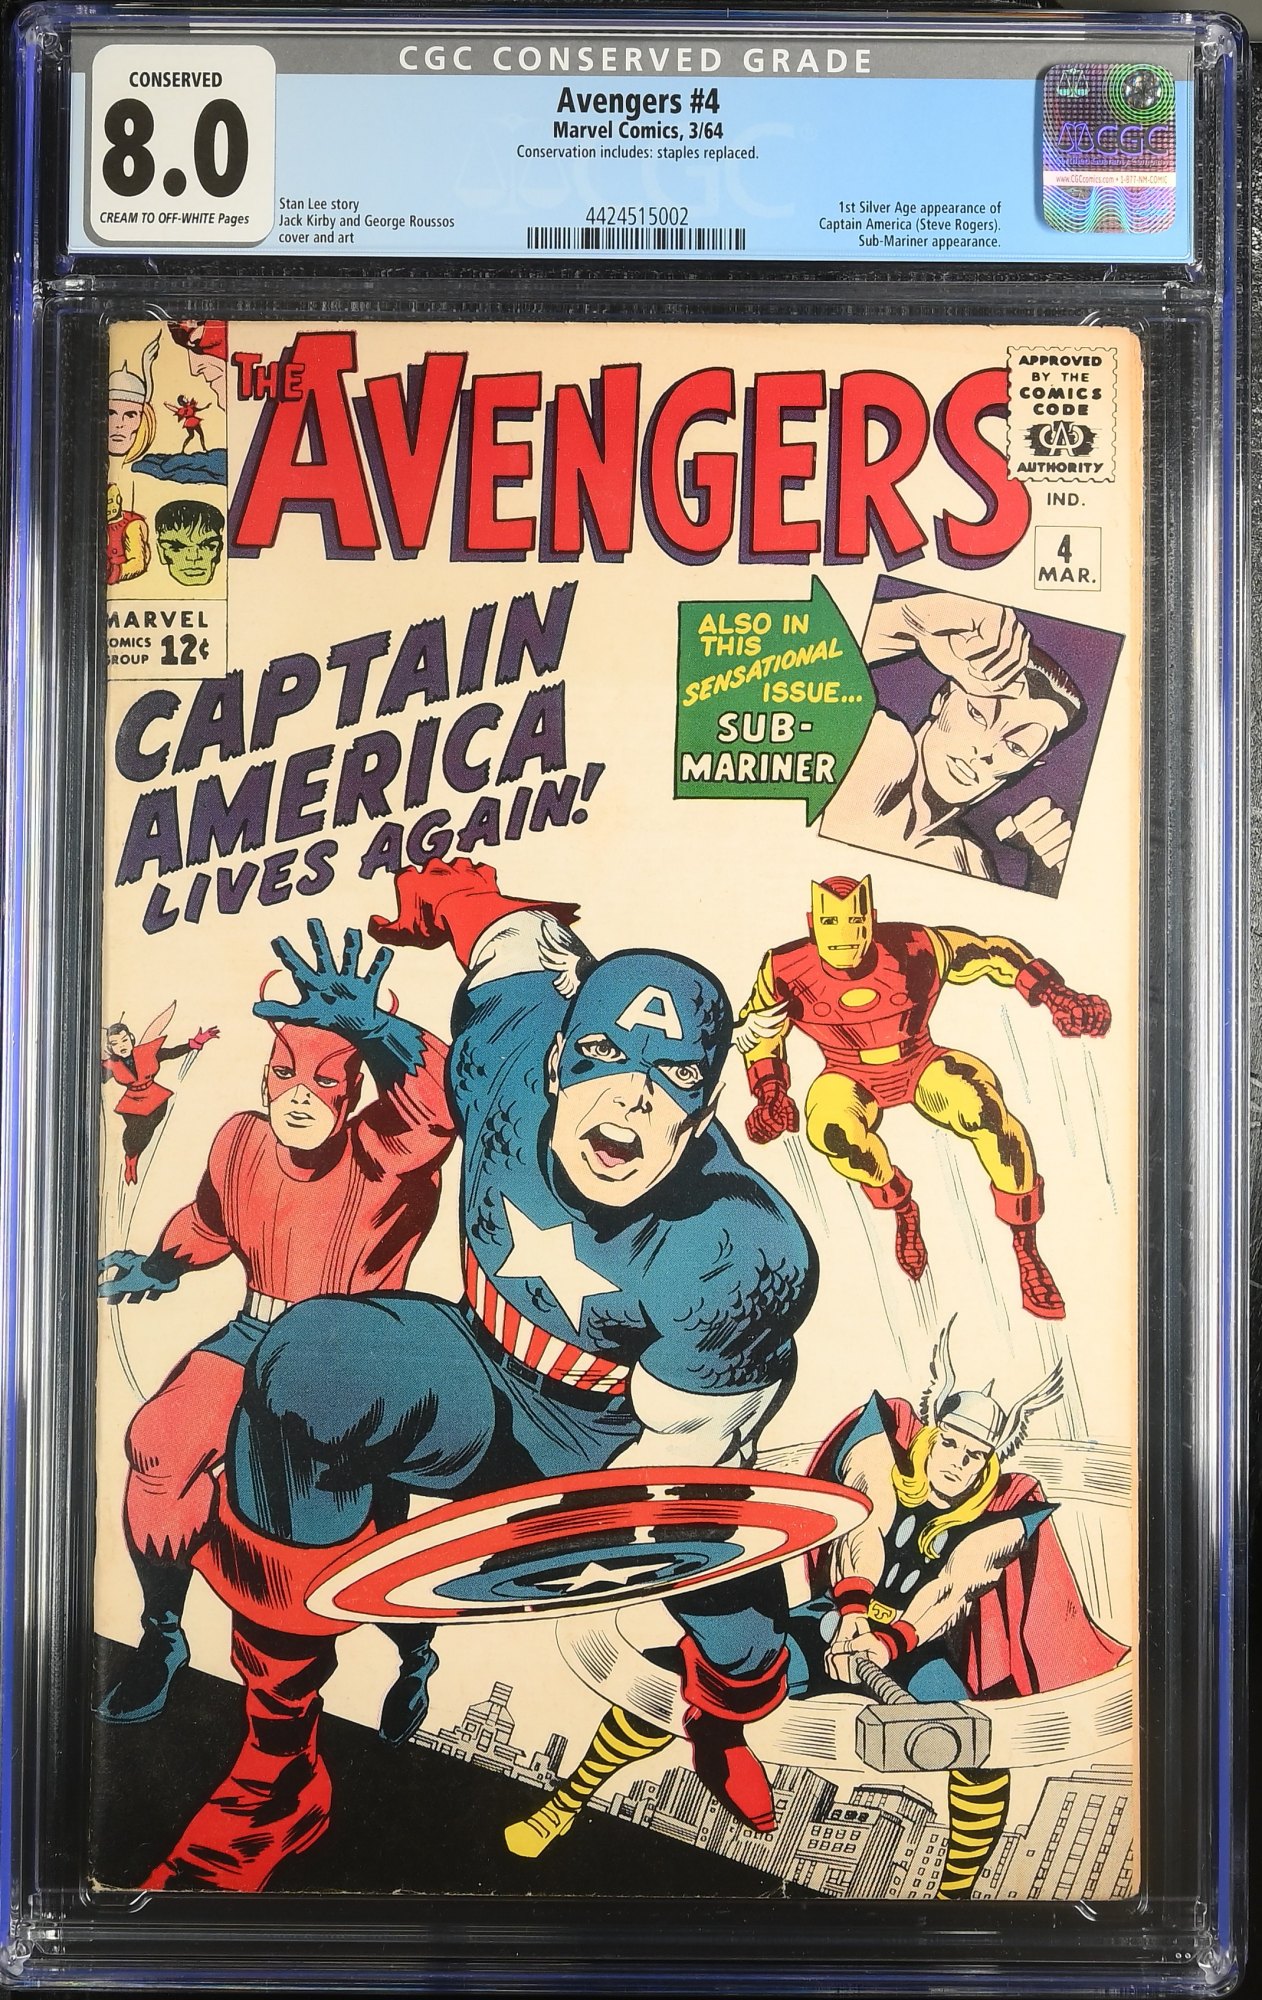 Image: Avengers #4 CGC VF 8.0 Conserved 1st Silver Age Captain America!